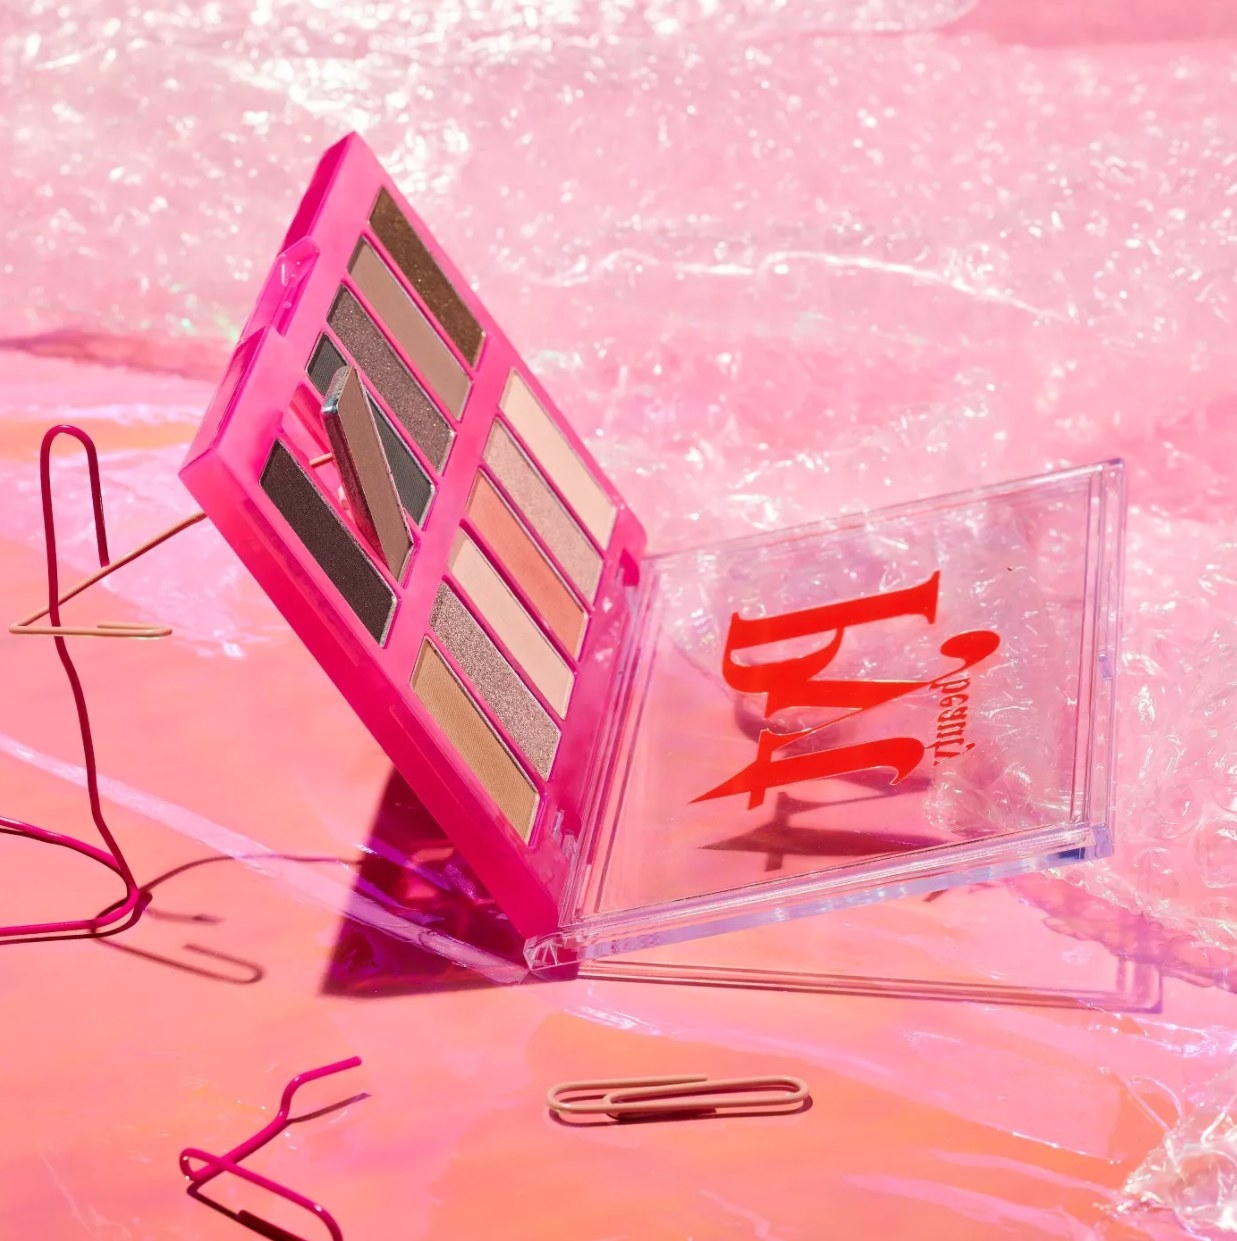 Open palette surrounded by paper clips against pink set